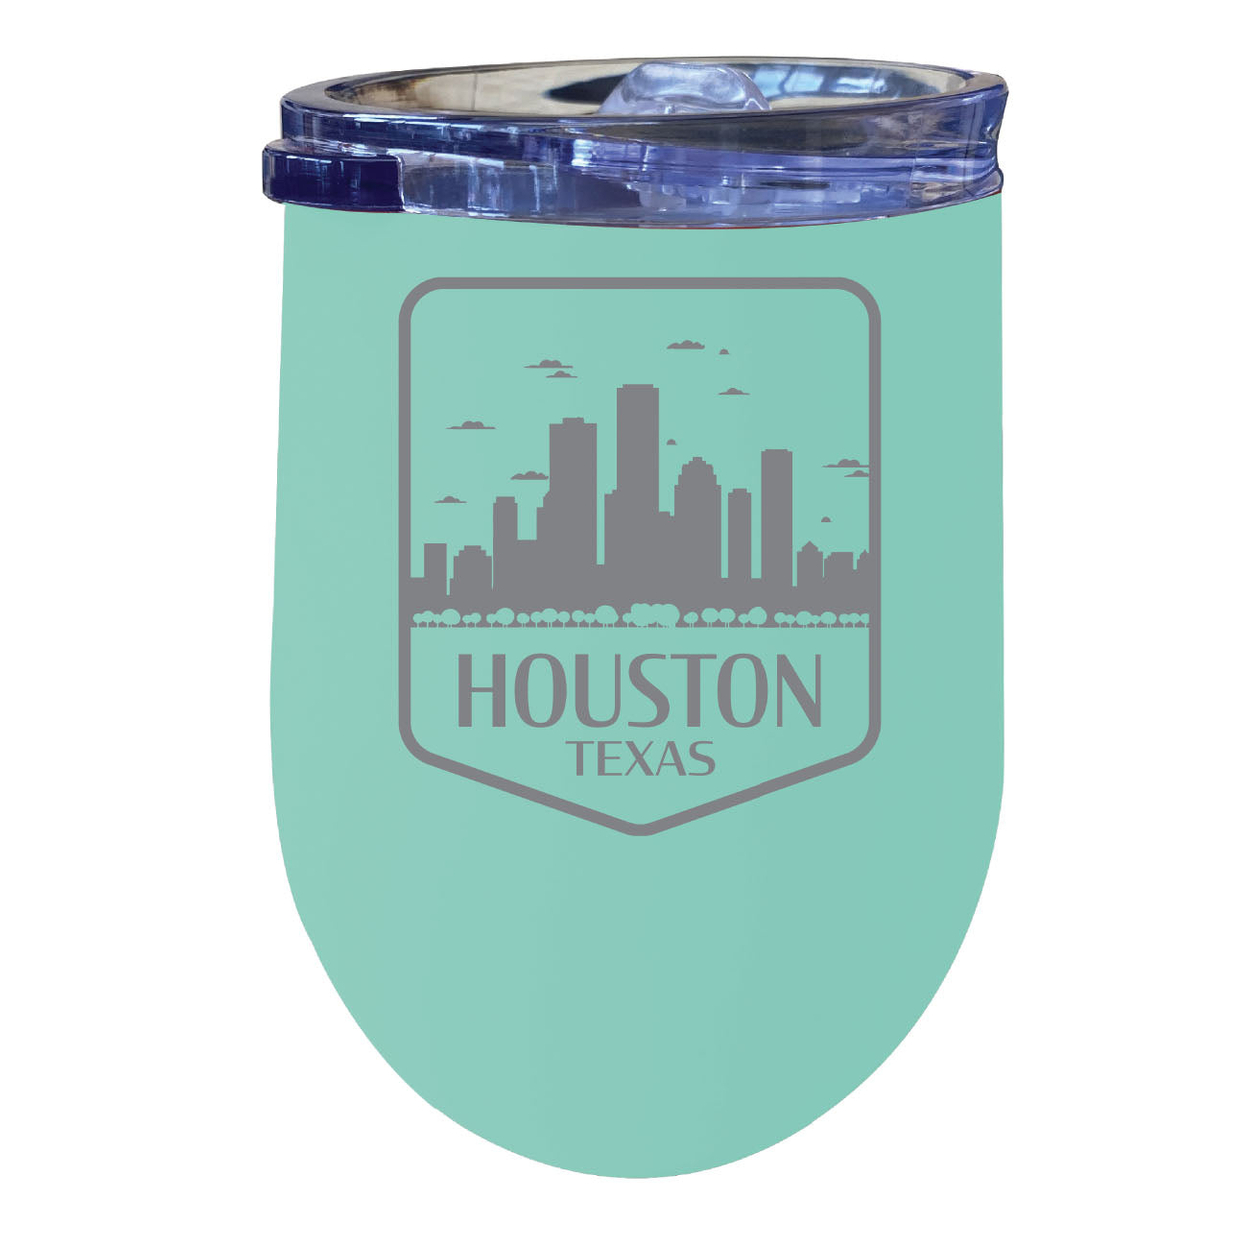 Houston Texas Souvenir 12 Oz Engraved Insulated Wine Stainless Steel Tumbler - Navy,,4-Pack